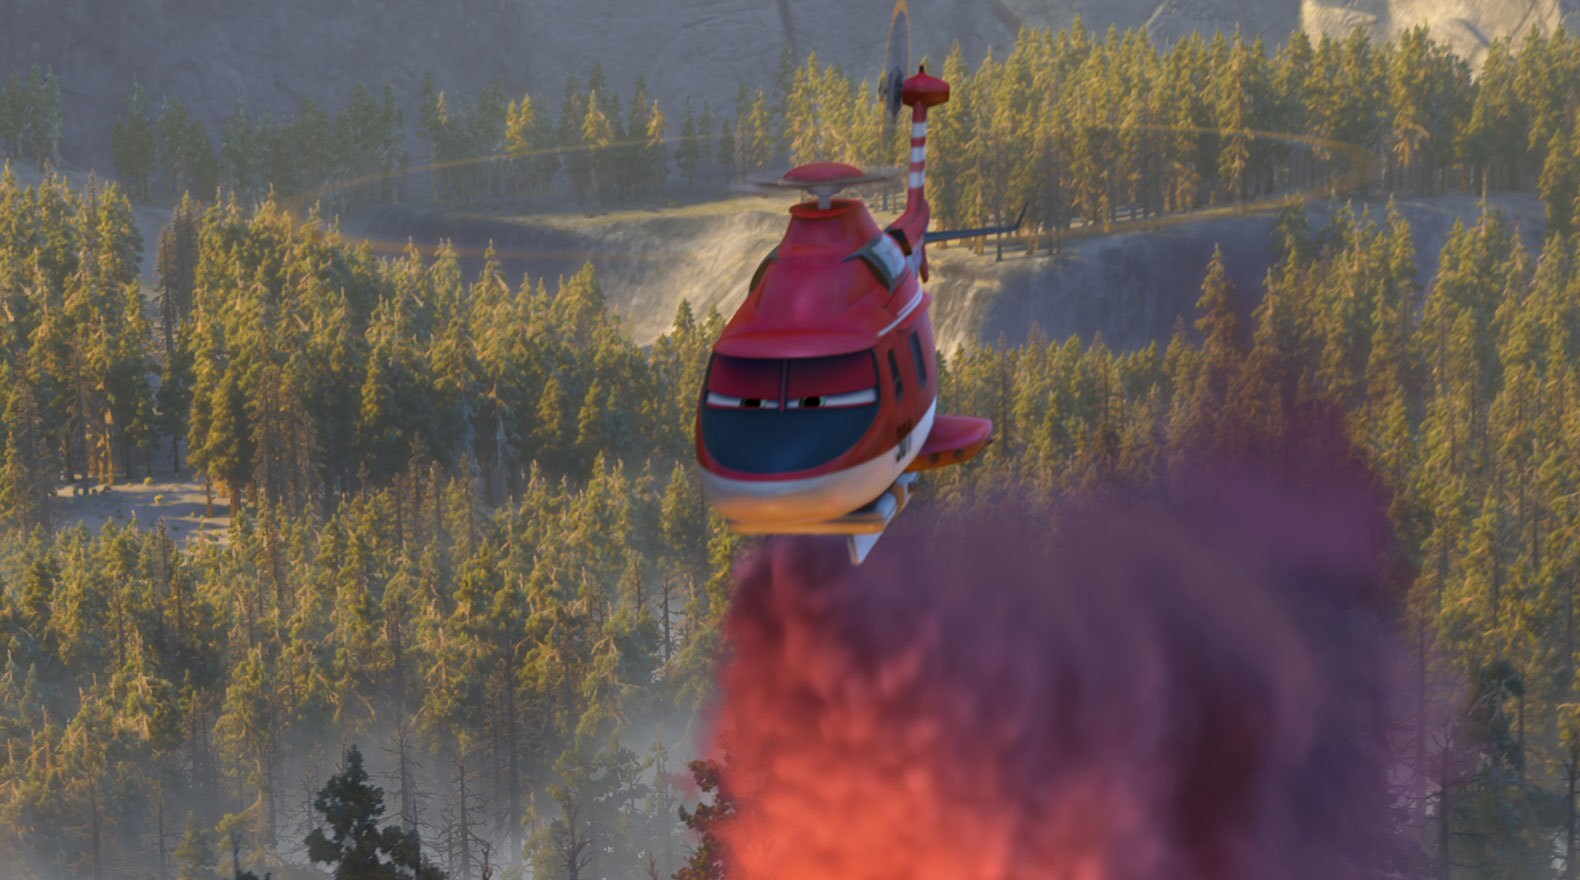 Blade Ranger (Ed Harris) flying over a forest fire.